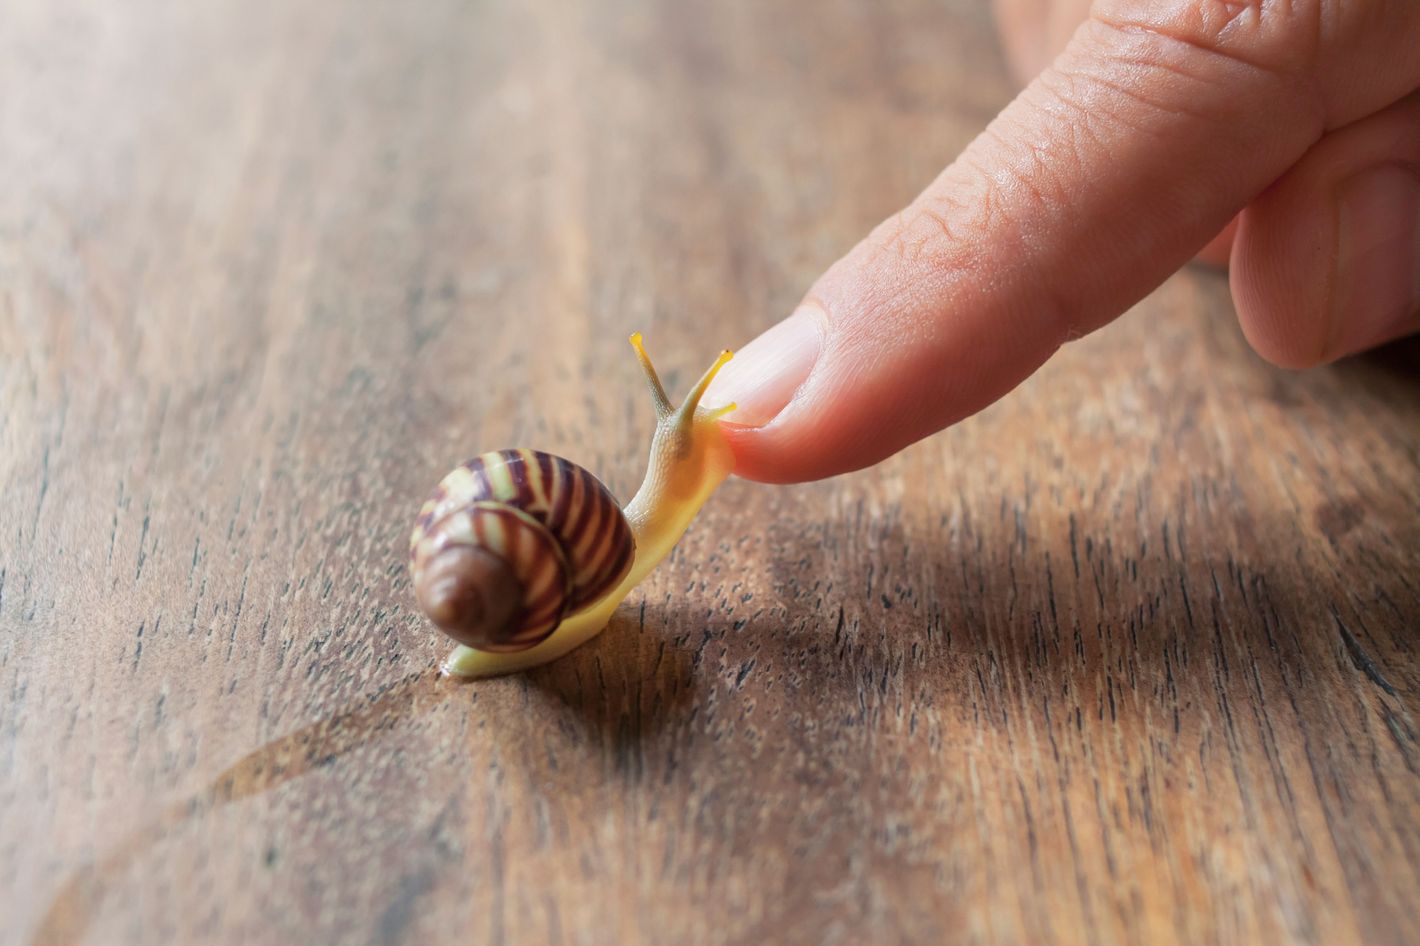 Does Slimy Snail Cream Do Anything for Your Face?